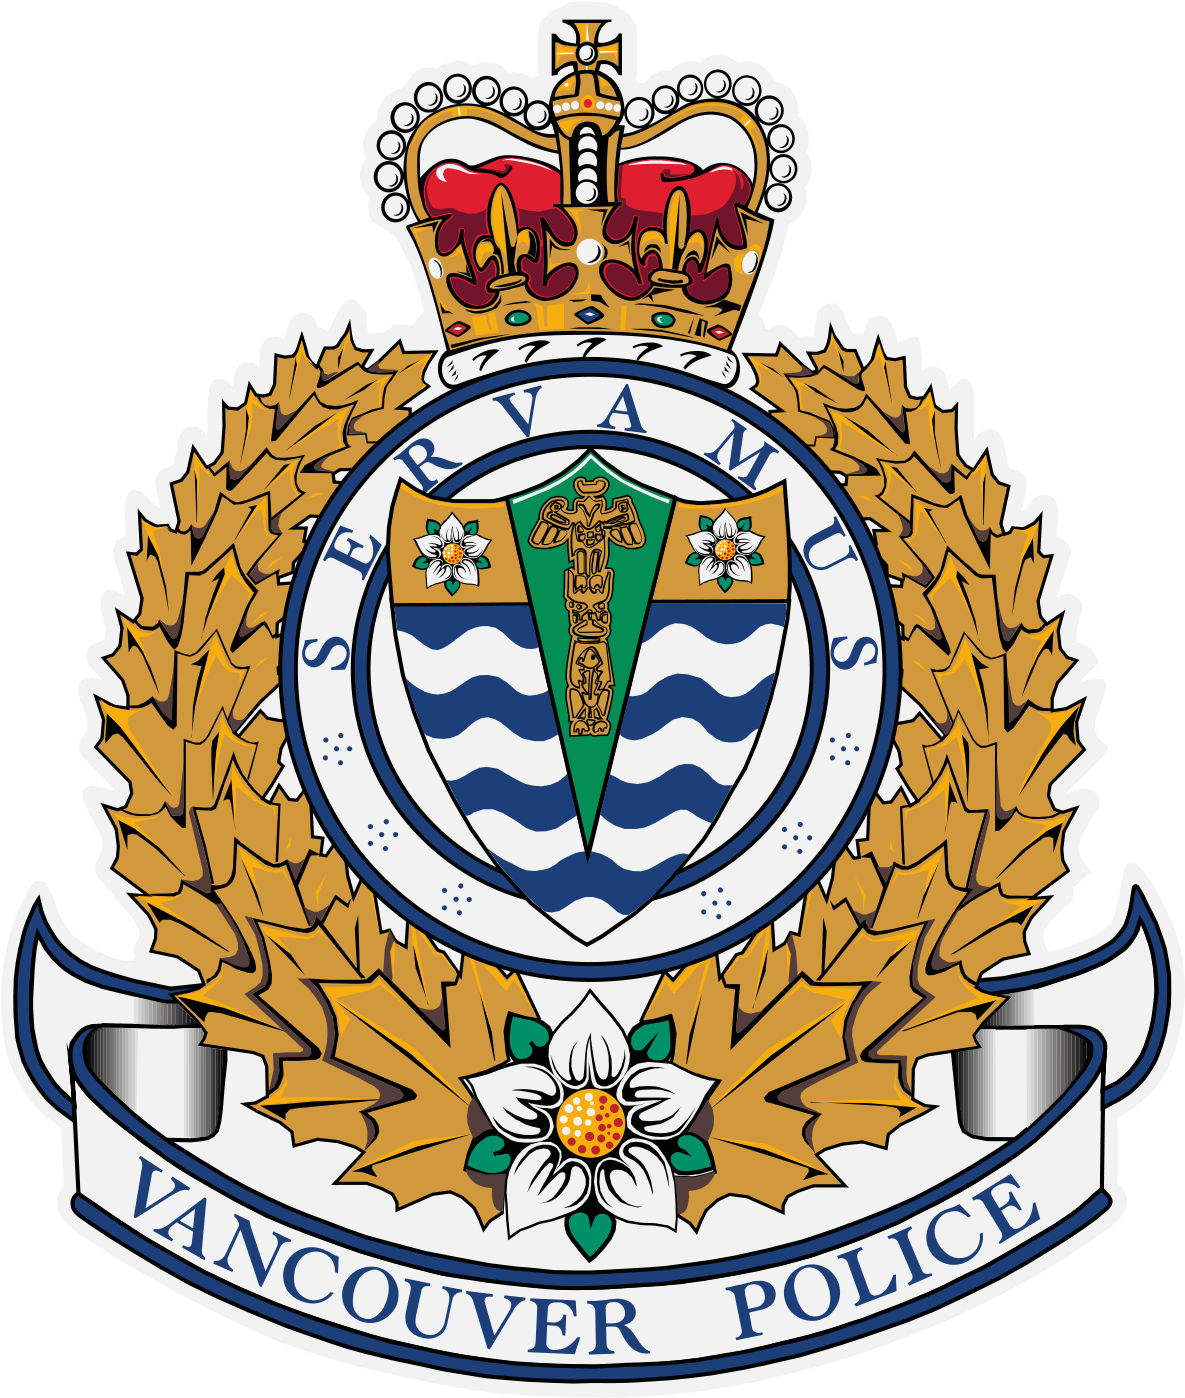 Vancouver Police Department Logo (1200x1411)